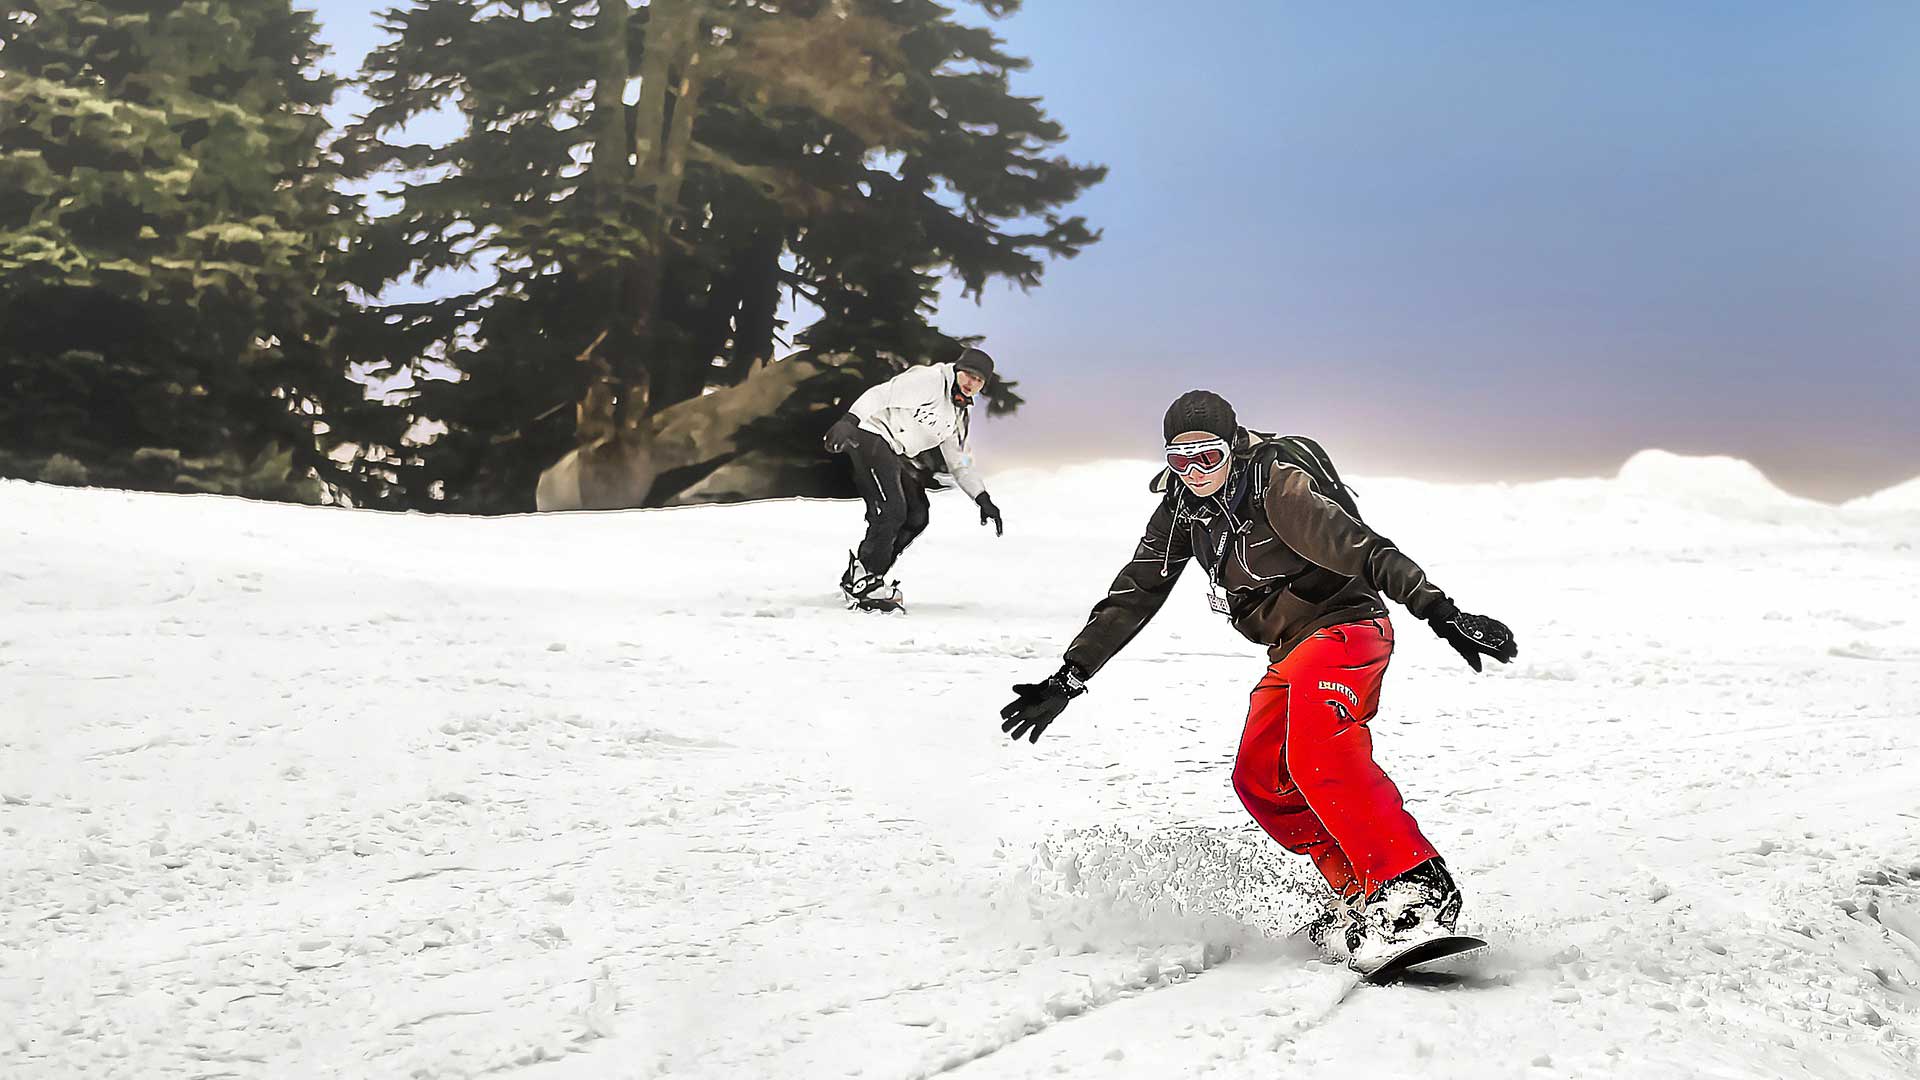 Get Best Tips to Improve Snowboarding Right Now